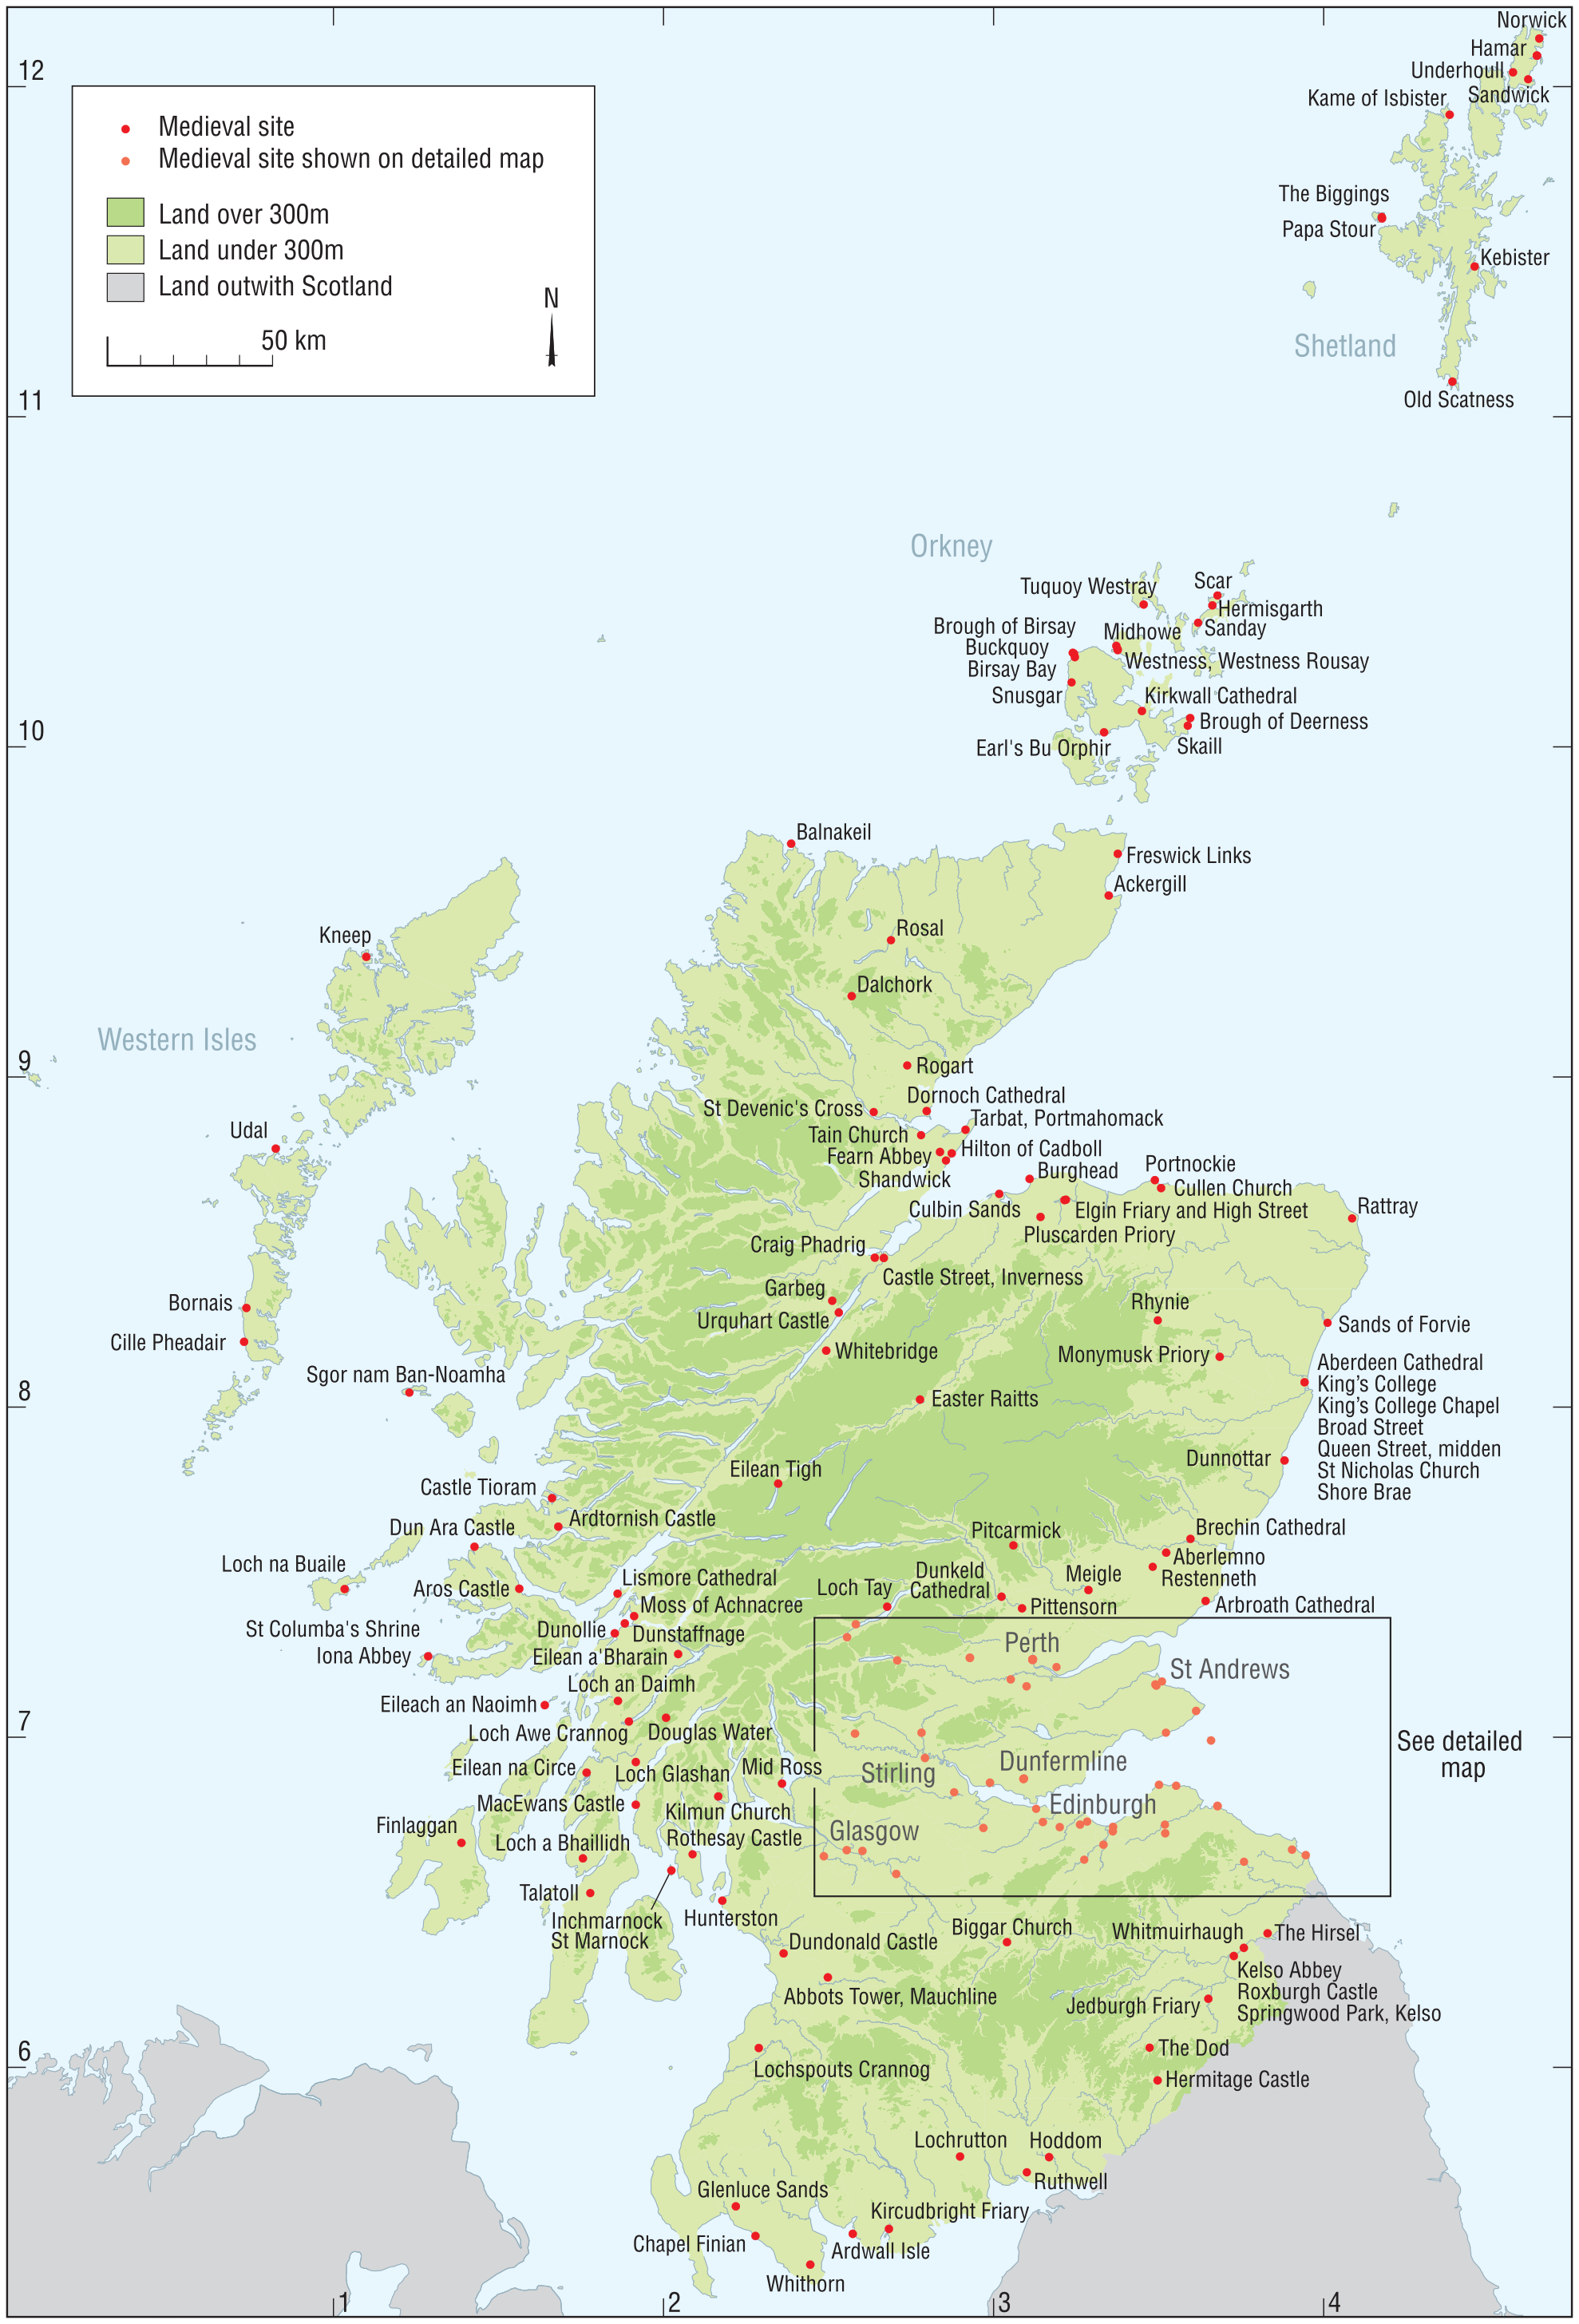 A map of scotland showing the distribution of Medieval sites